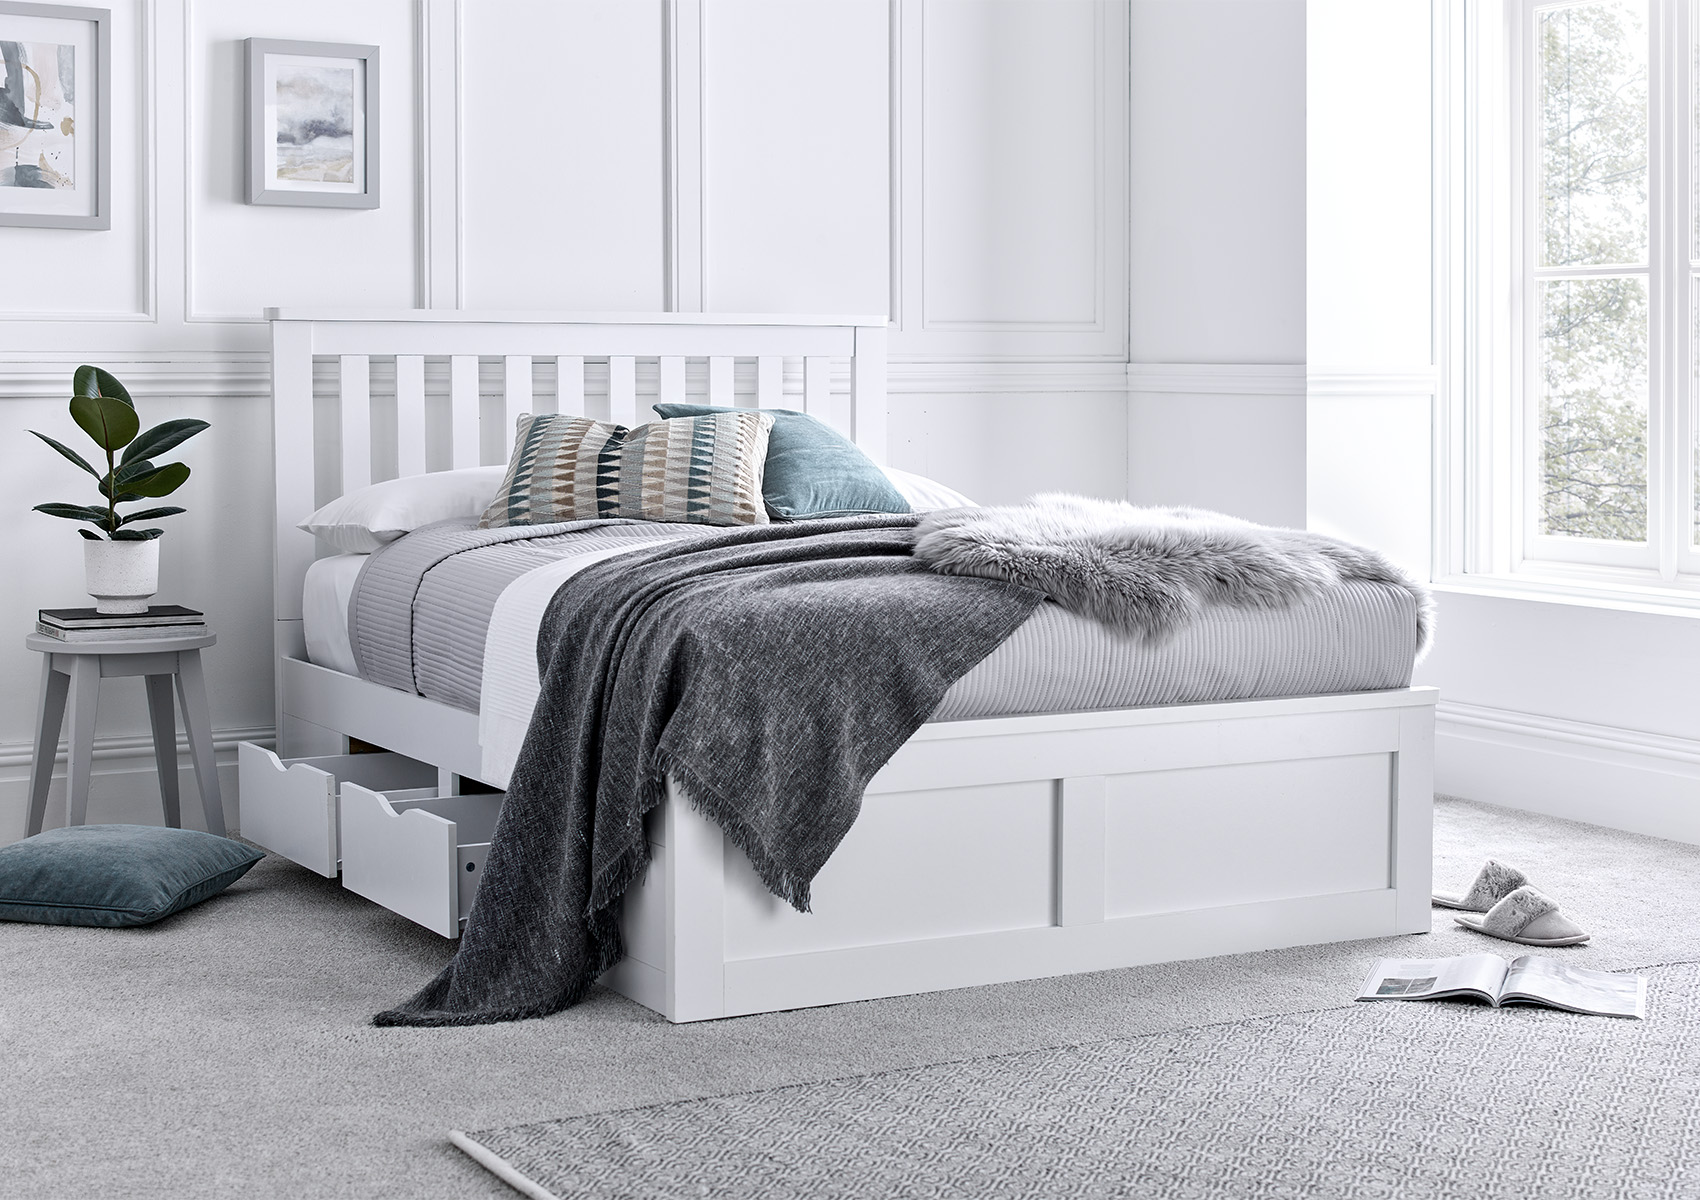 View Madison White 4 Drawer Wooden Bed Frame Time4Sleep information